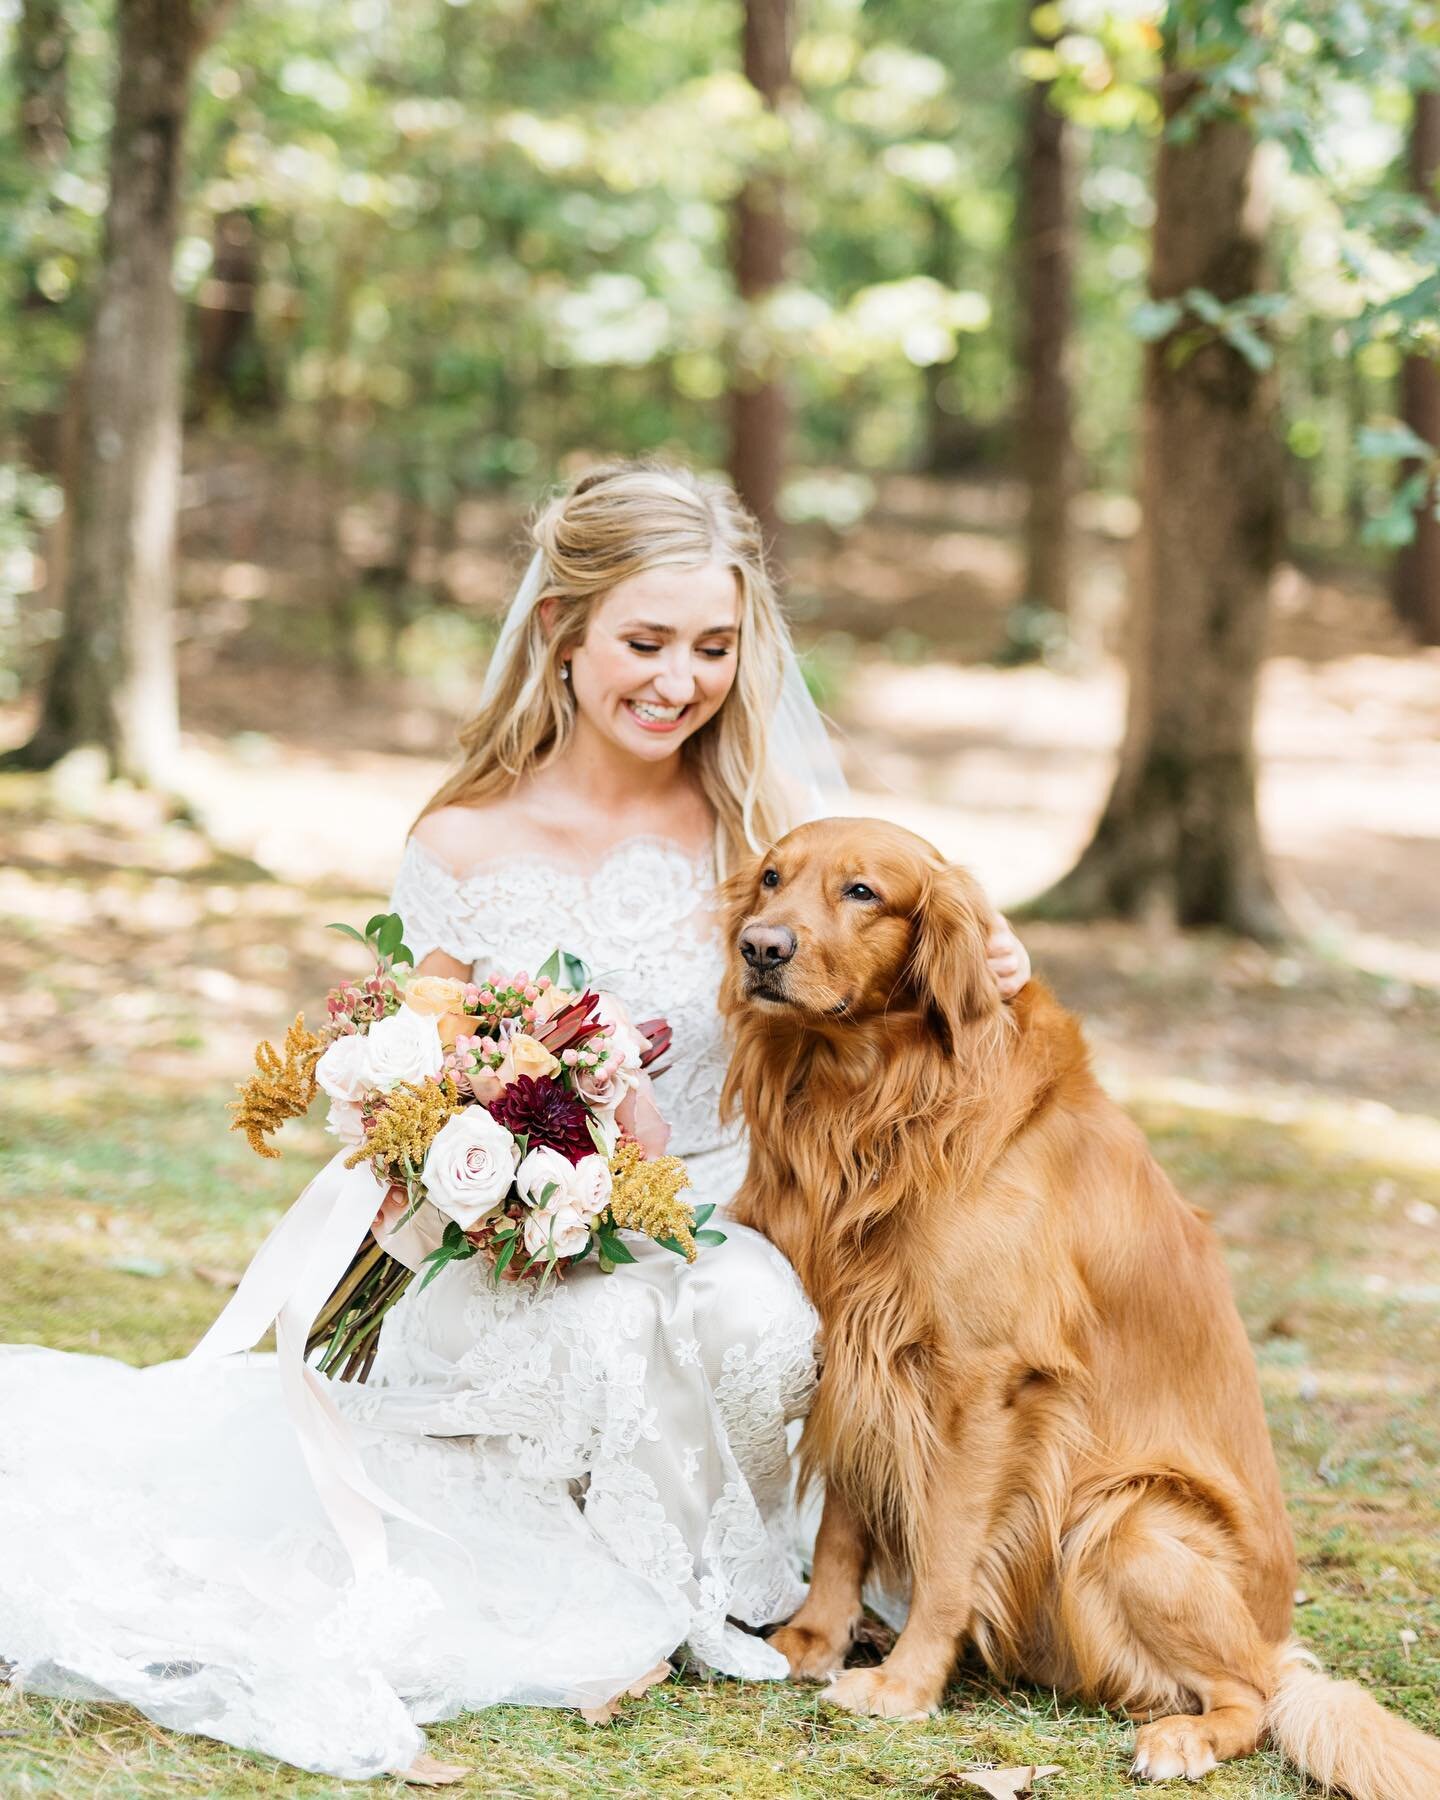 A little puppy love for #nationaldogday ❤️❤️❤️ I mean could they be any cuter??? Real KBE bride: @darbypresley  Photo: @sweetjulepphotography #kaleebakerevents #alabamaweddingplanner #southernbride #classicbride #churchwedding #bride #weddingdog #bes